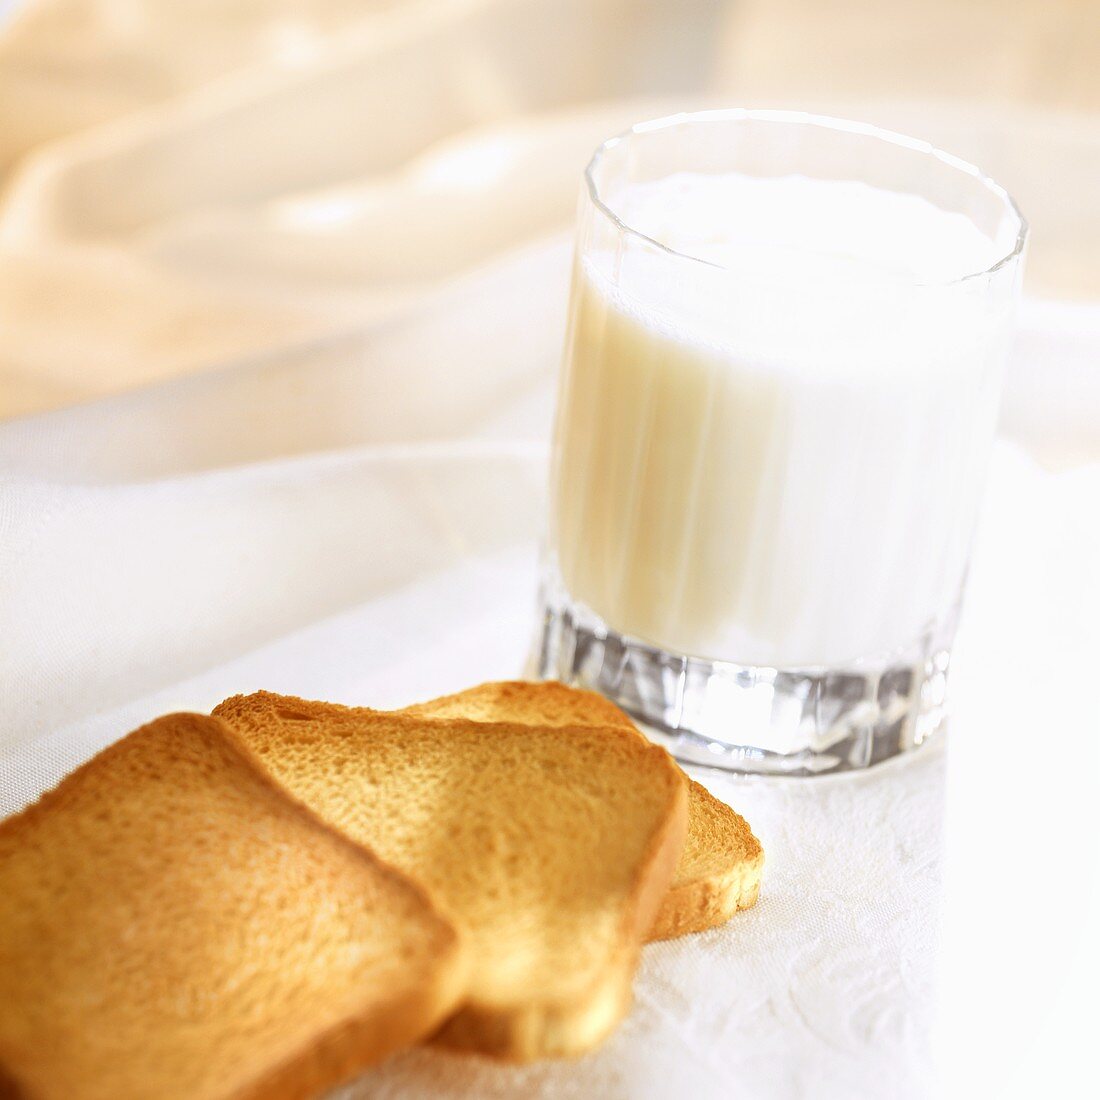 Slices of zwieback and glass of milk